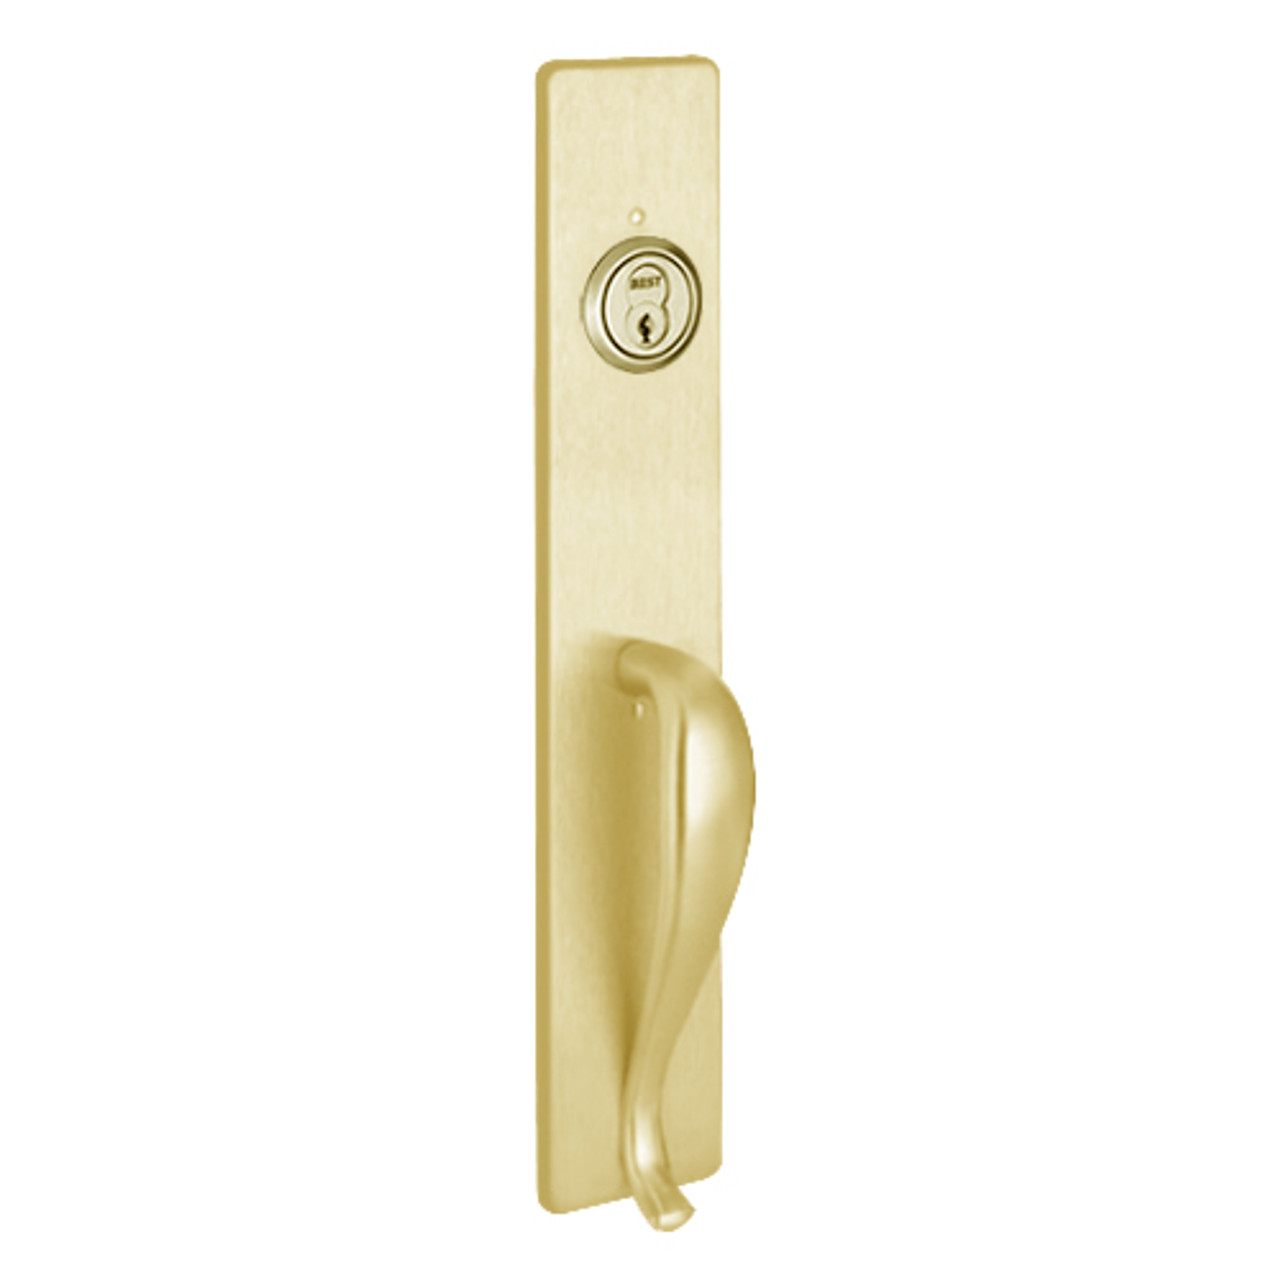 R1703B-605 PHI Key Retracts Latchbolt Retrofit Trim with B Design Pull for Apex and Olympian Series Exit Device in Bright Brass Finish